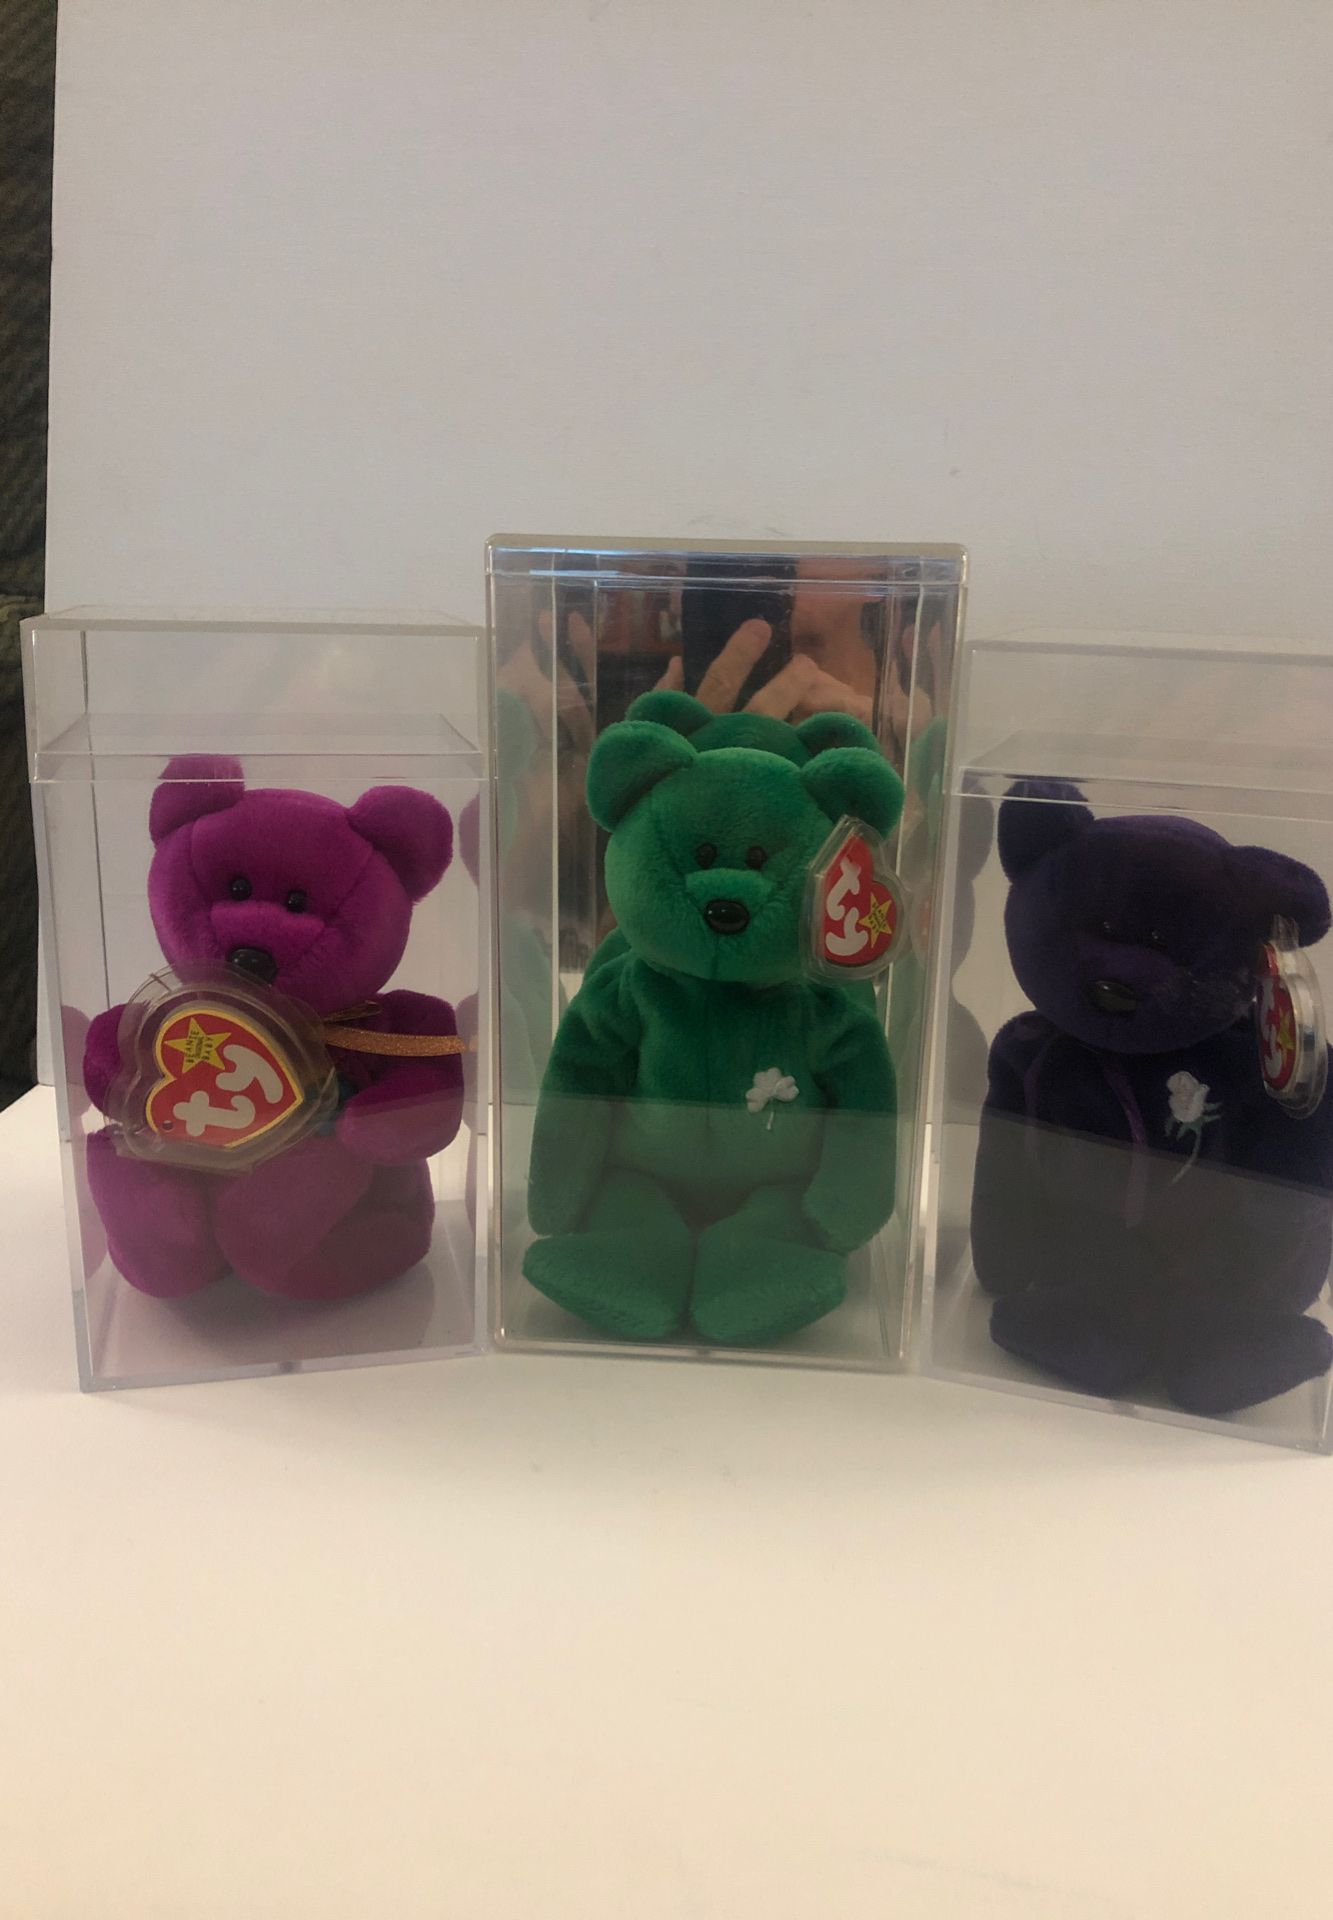 VERY NICE BEANIE BABIES AND DISPLAY BOXES MAKE OFFER